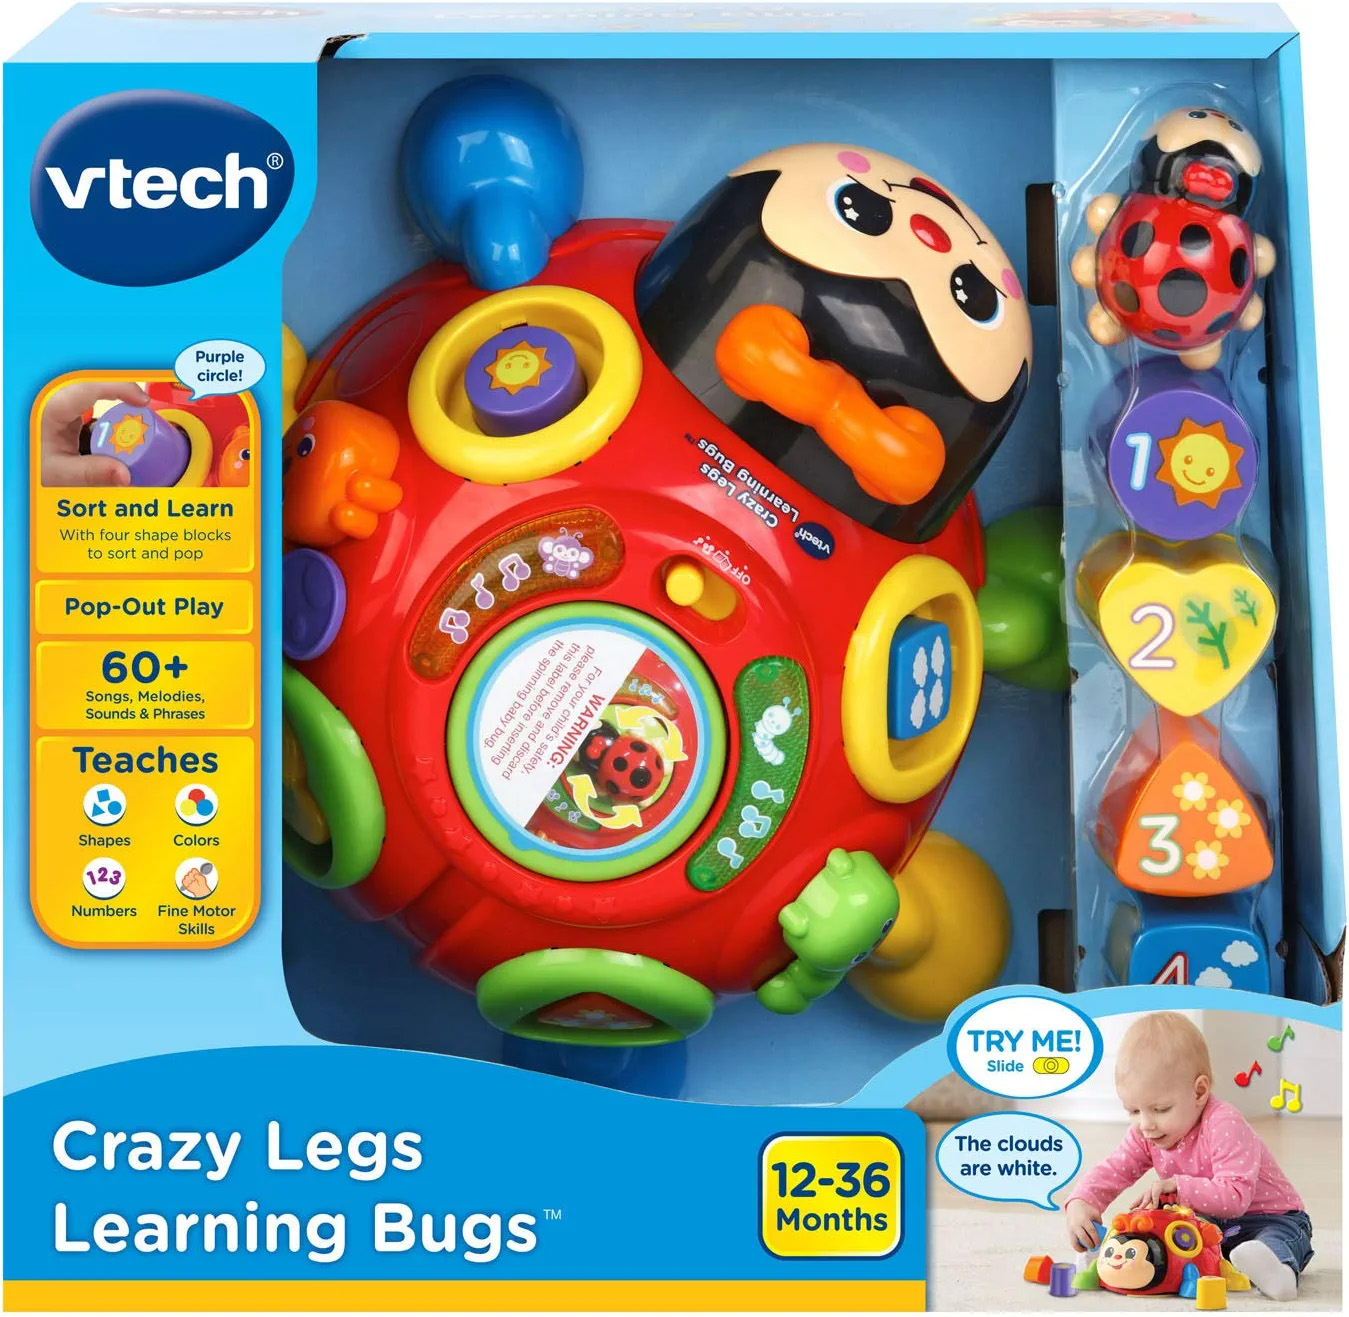 Crazy Legs Learning Bug